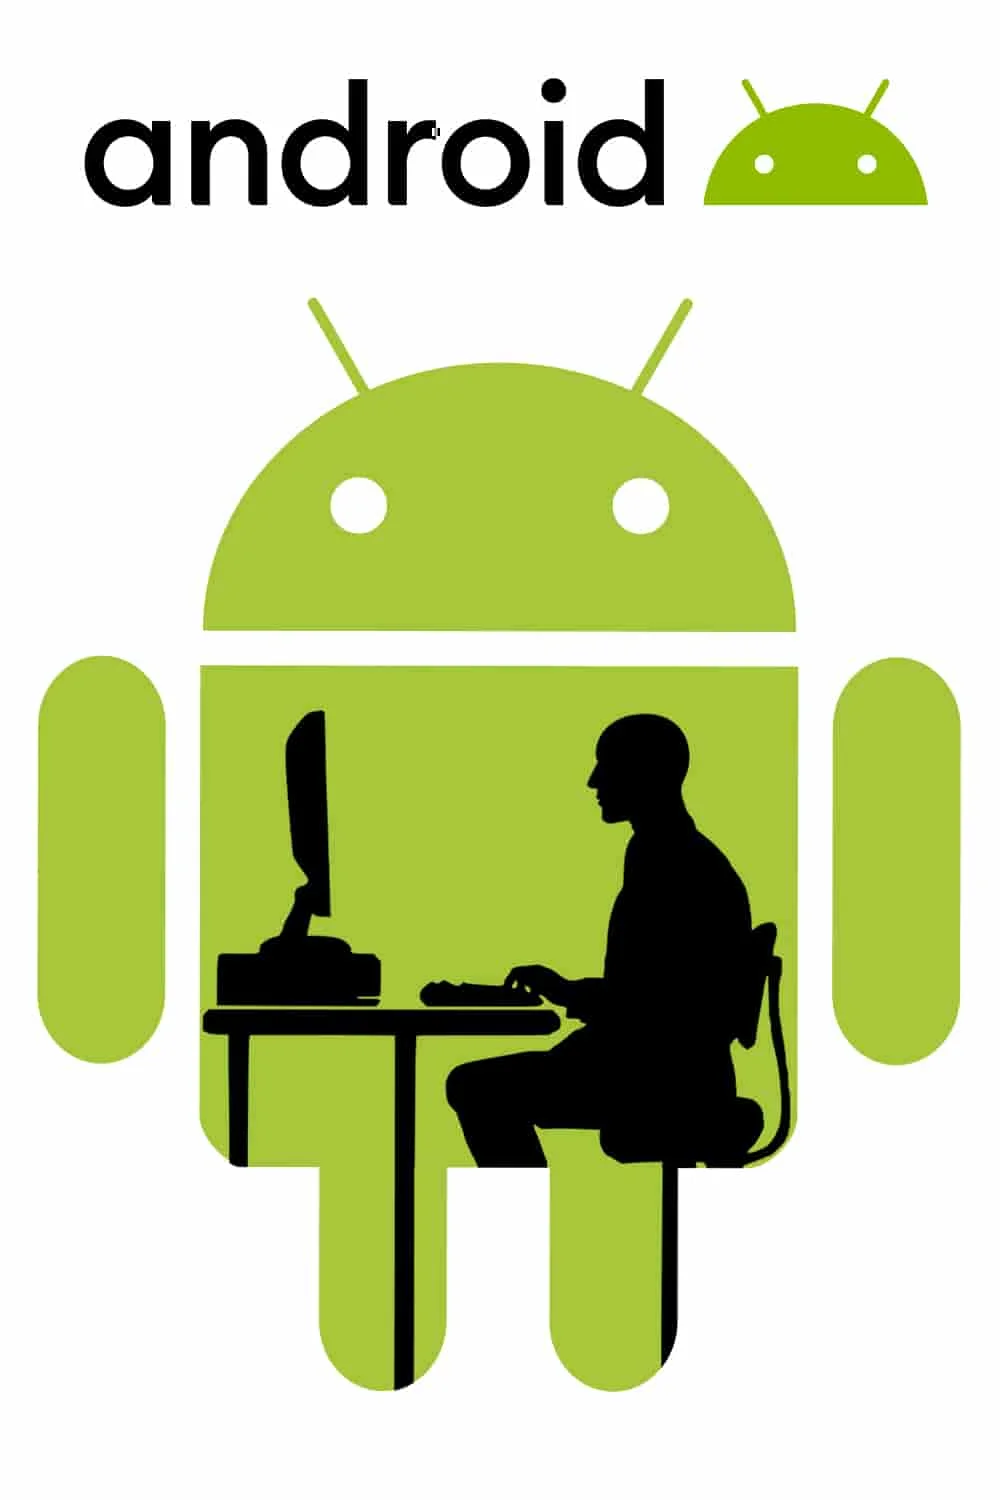 hire android developer